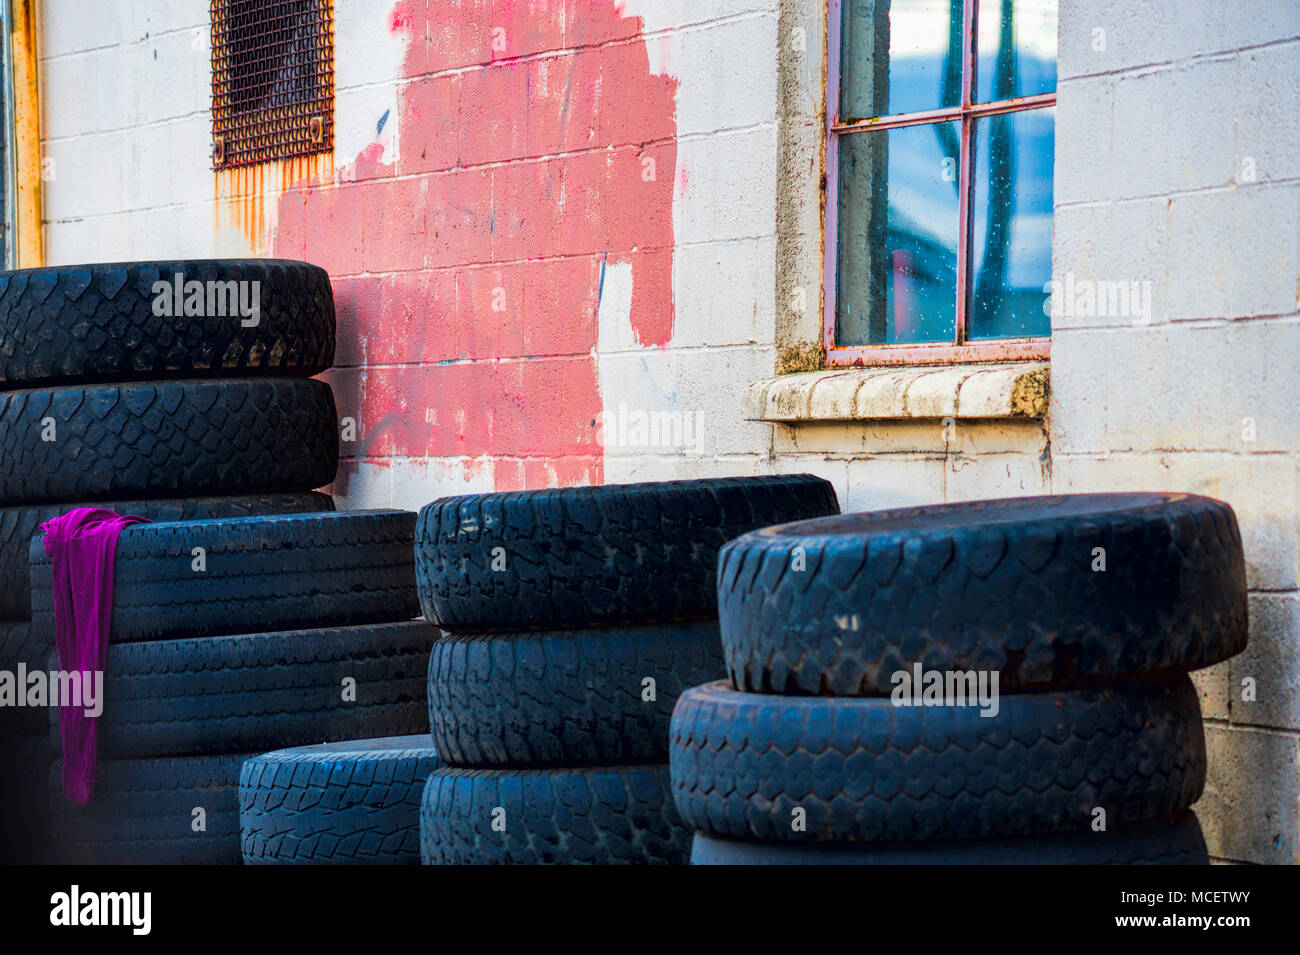 Tires stacked against a building with a red rag hanging off of one stak. Stock Photo